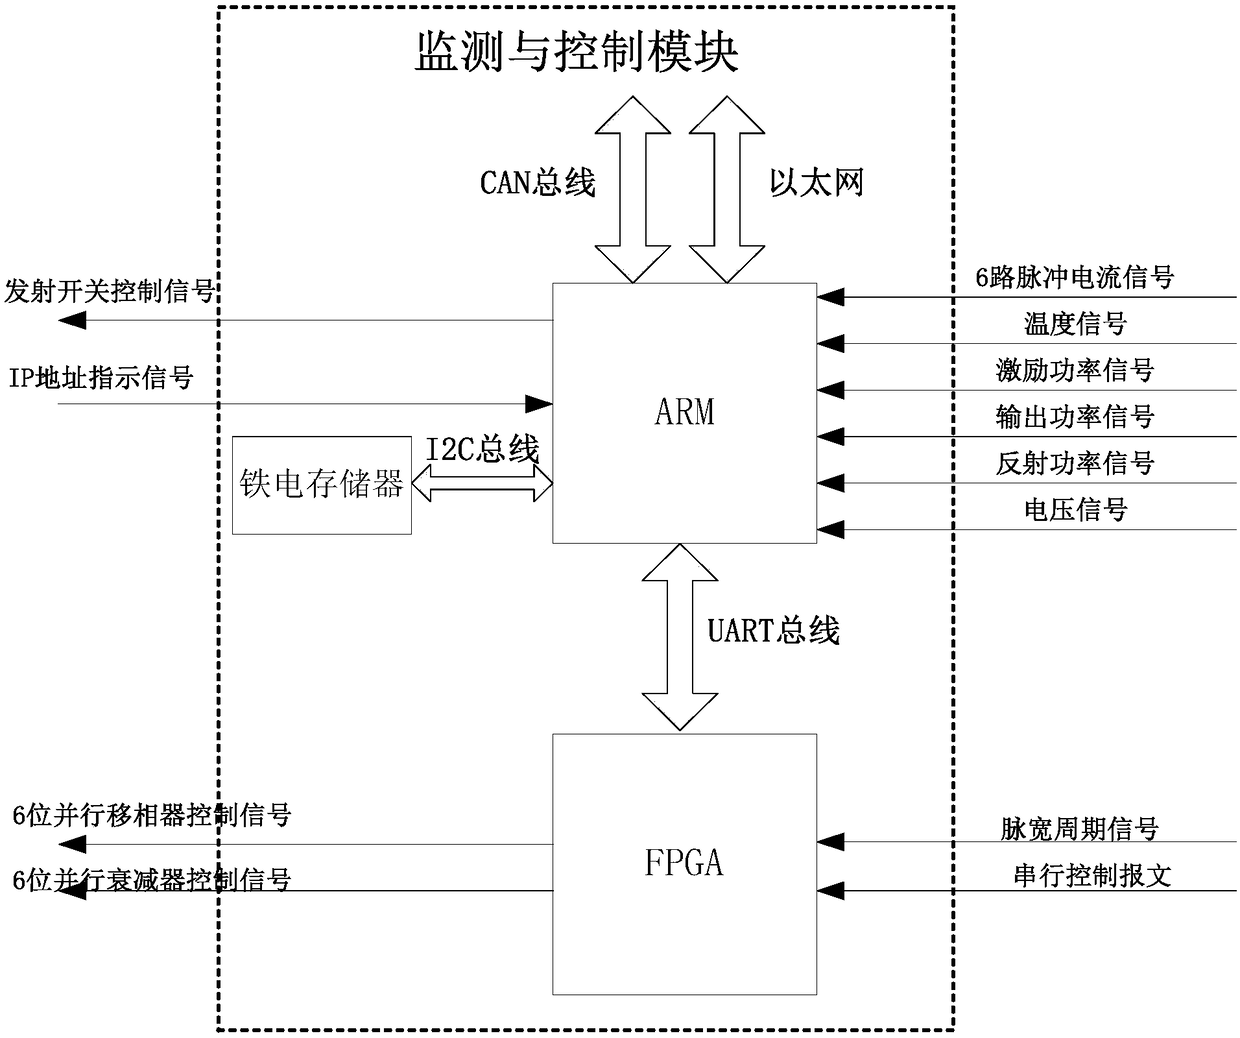 T/R component control and monitoring method based on ARM and FPGA architectures